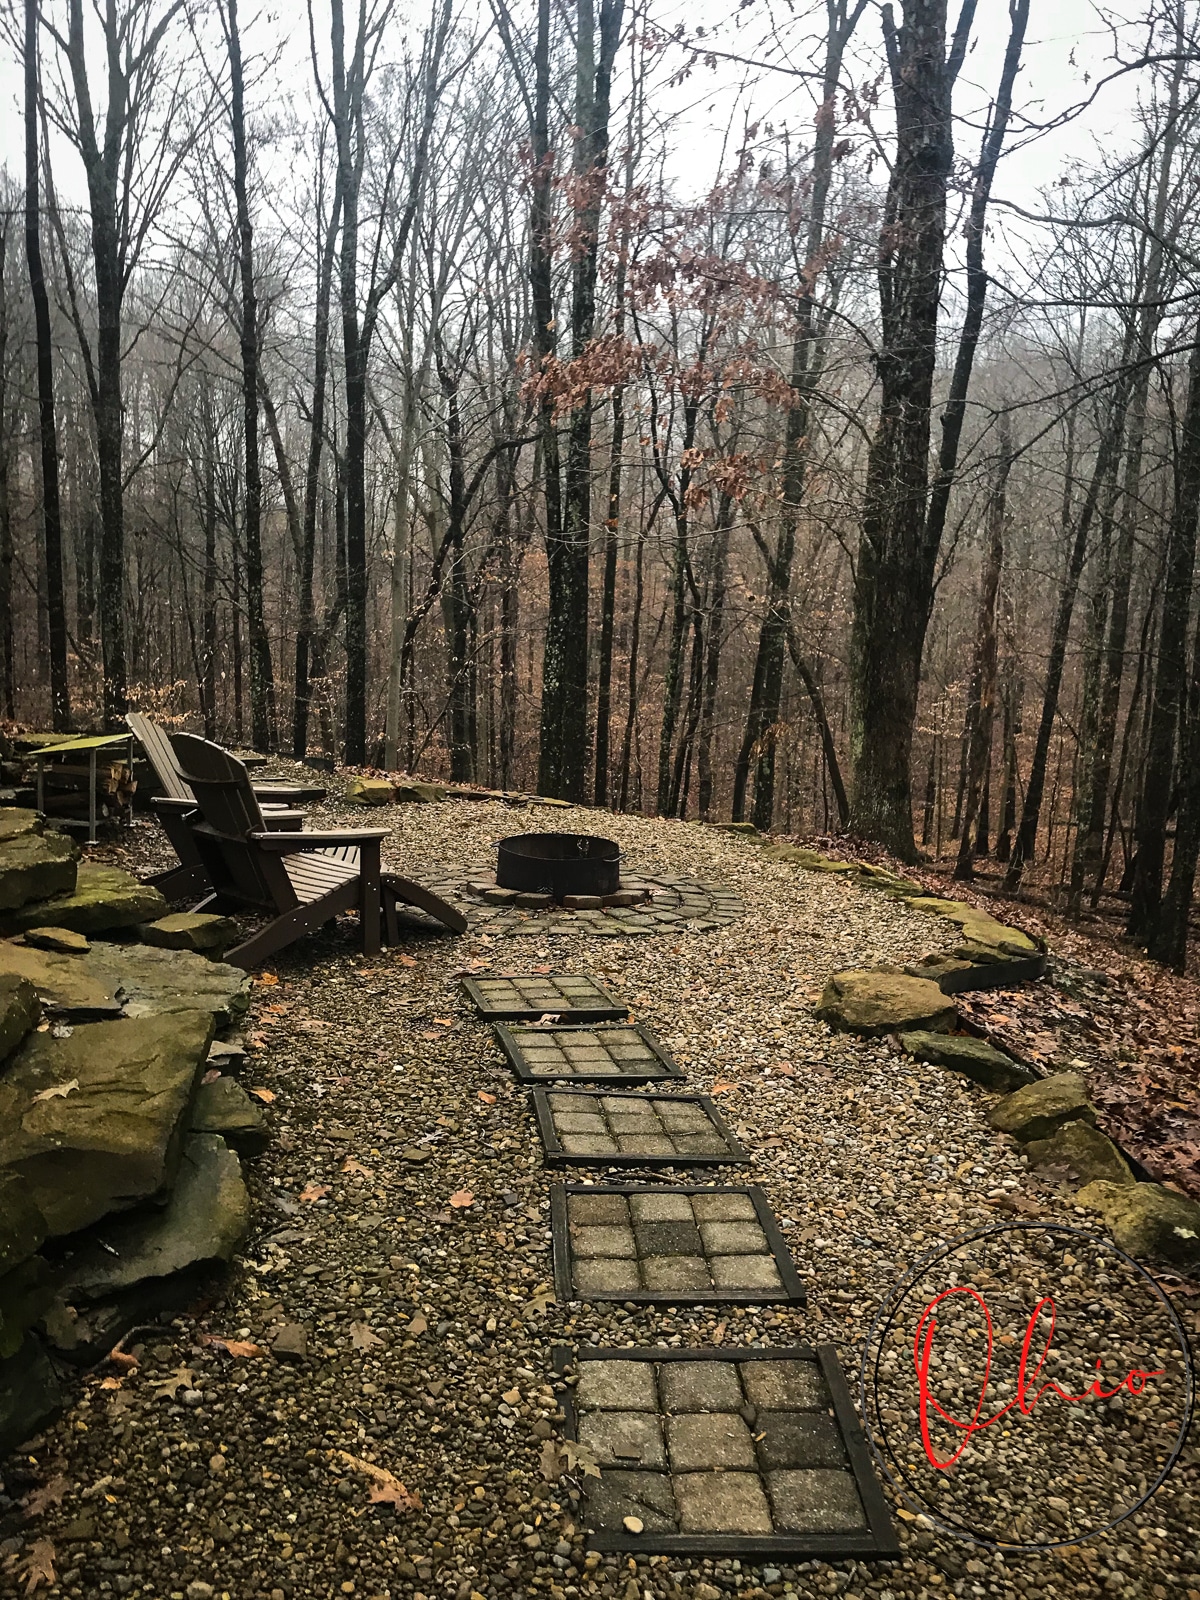 dark fall day in woods with trees with no lives, stone walk way to fire pit Photo credit: Cindy Gordon of VisitOhioToday.com